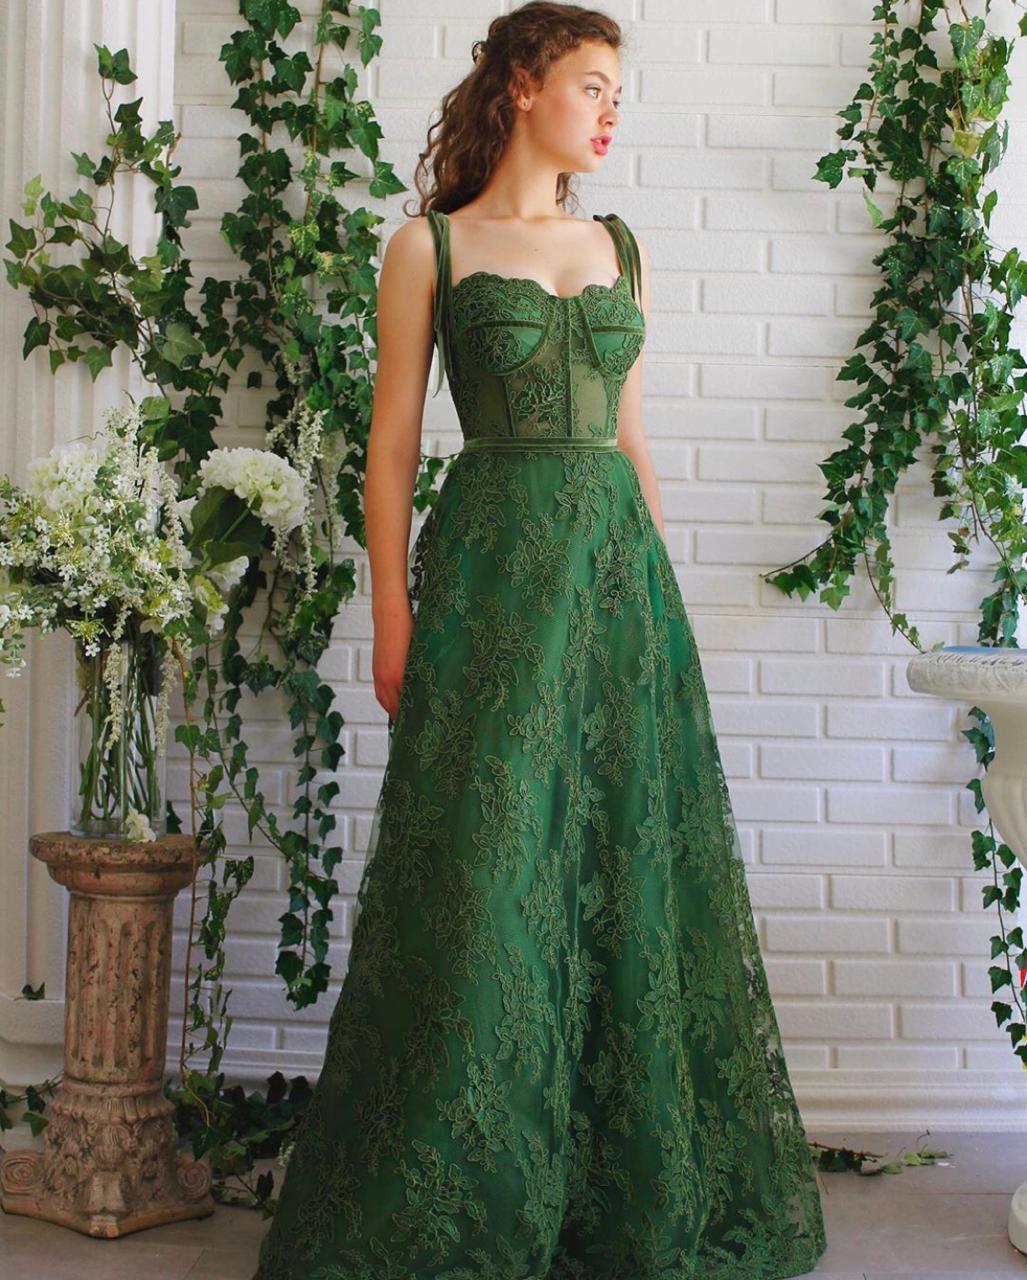 Green A-Line dress with lace and spaghetti straps